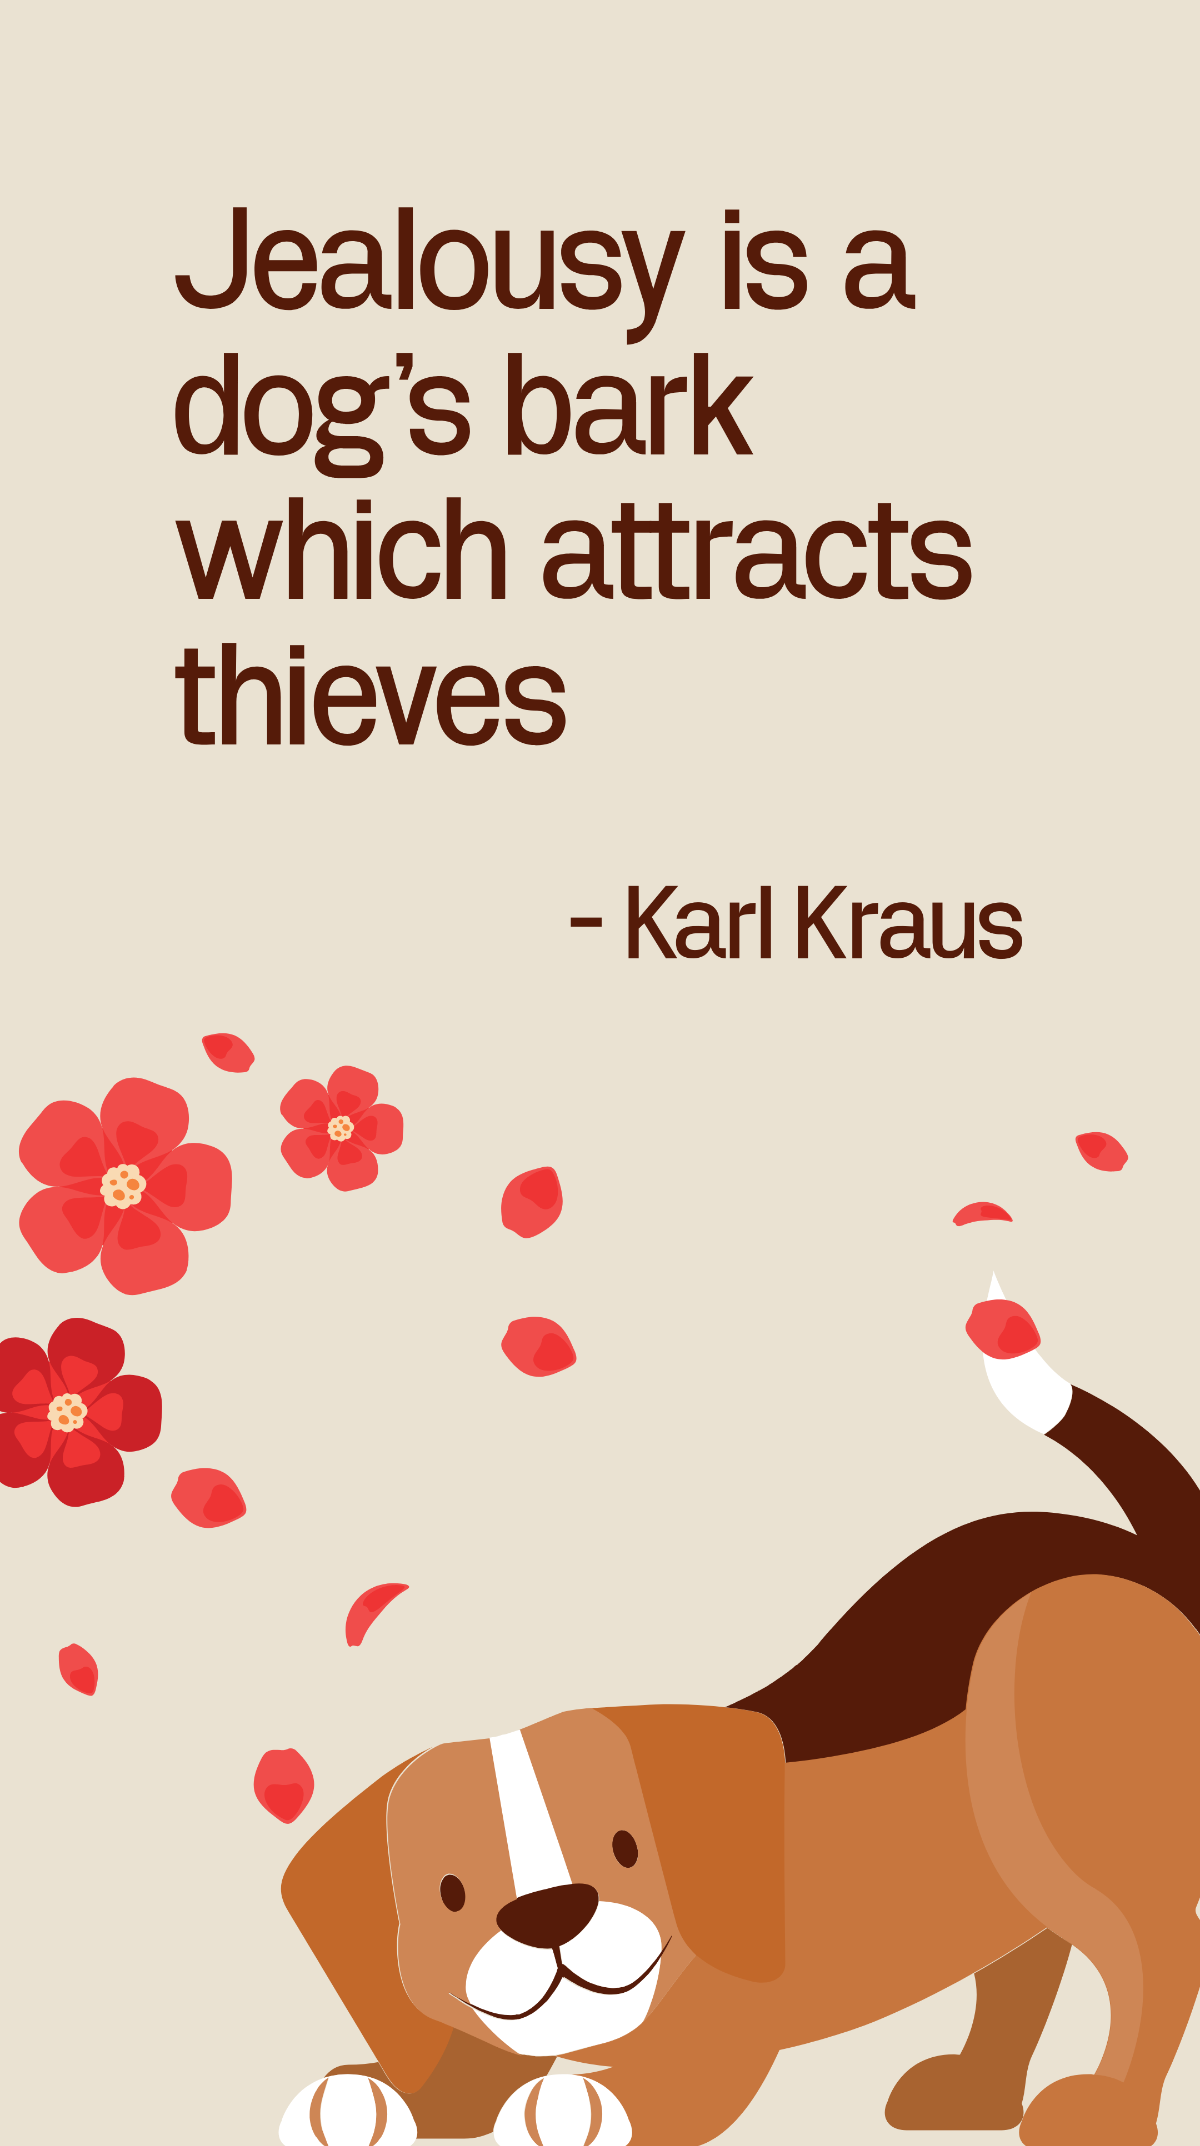 Free Karl Kraus - Jealousy is a dog's bark which attracts thieves Template